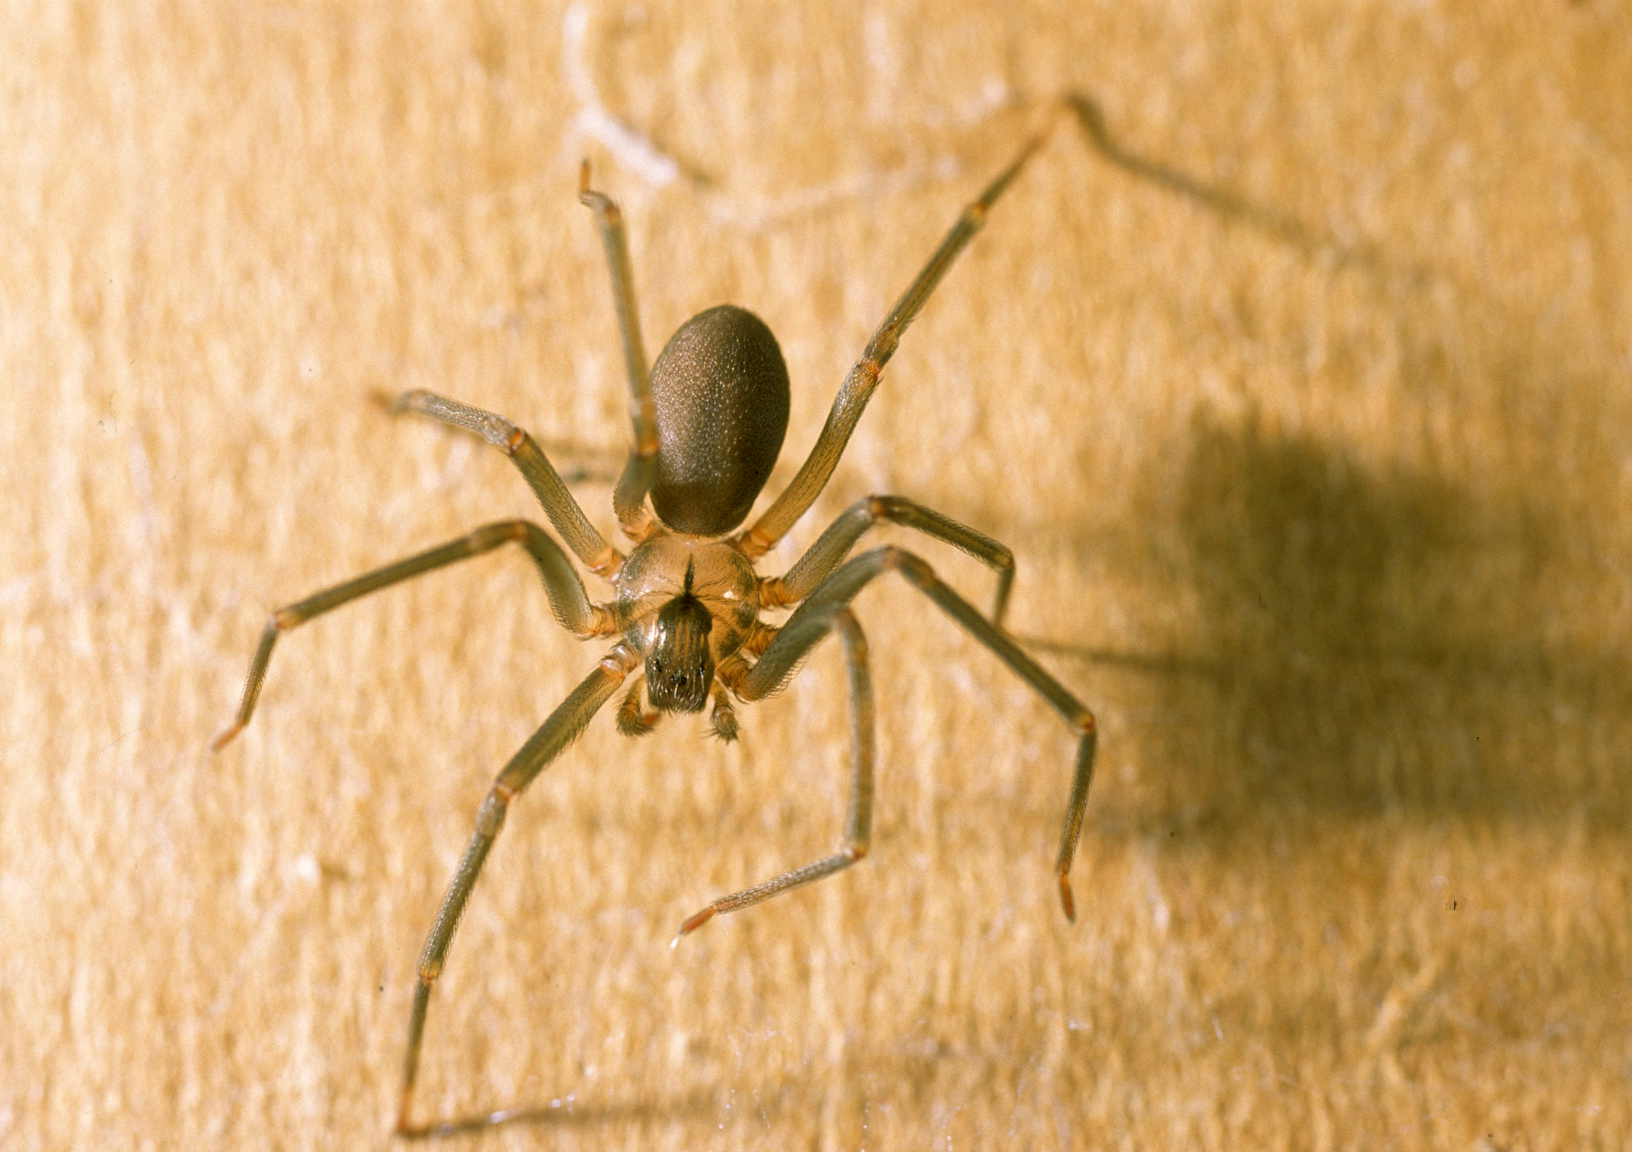 The Brown Recluse Spider